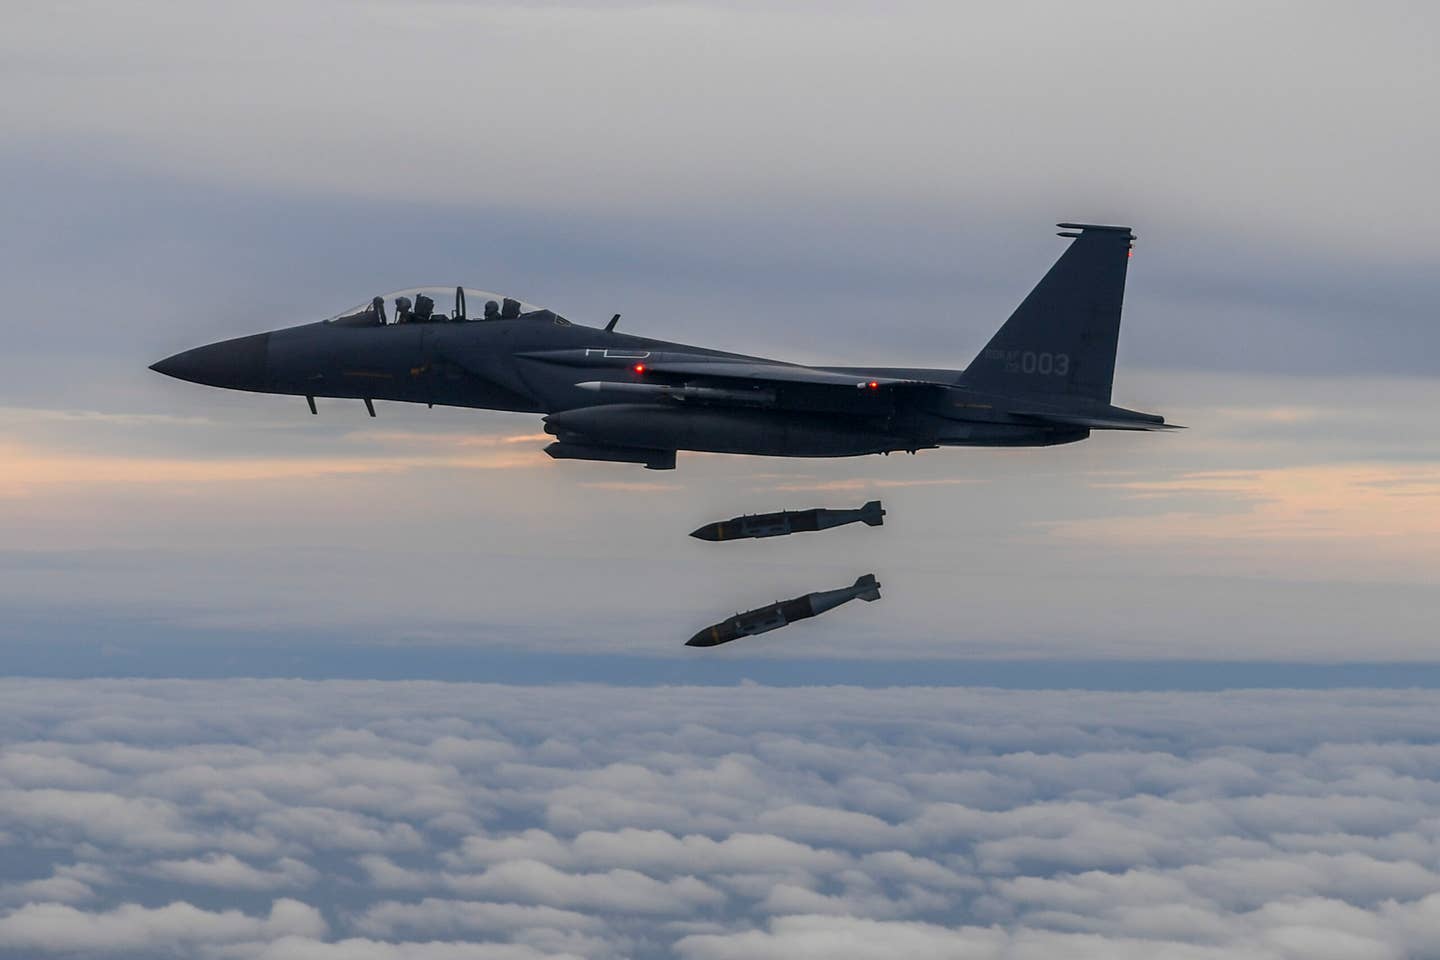 A photo released by the South Korean Defense Ministry shows a ROKAF F-15K dropping two Joint Direct Attack Munition (JDAM) bombs onto an island target in response to the North Korean IRBM launch earlier in the day, on October 4, 2022. <em>Photo by South Korean Defense Ministry via Getty Images</em>